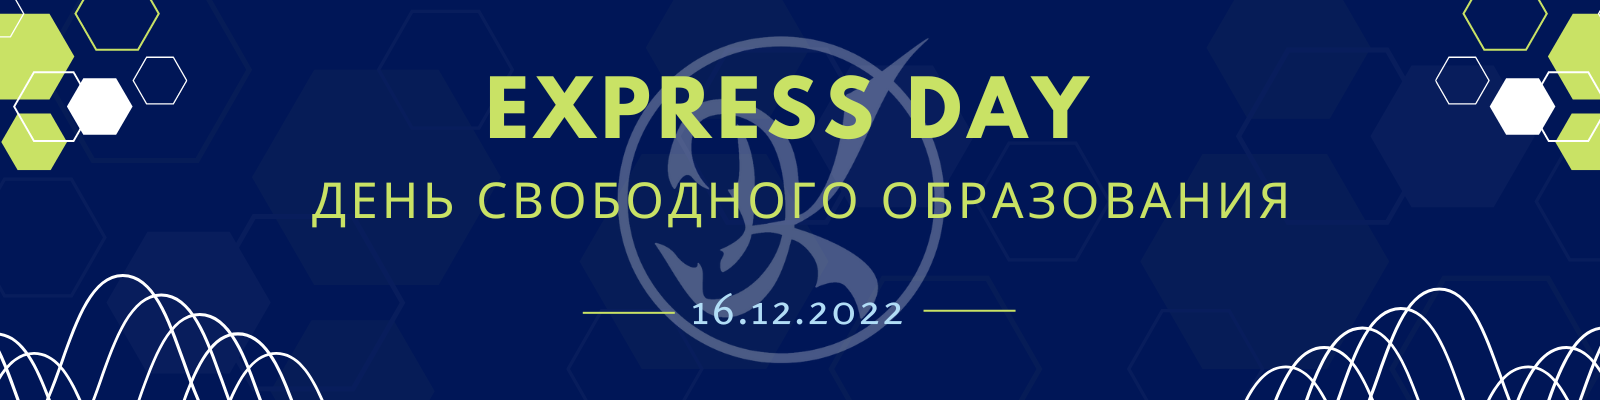 express day 16.12.2022